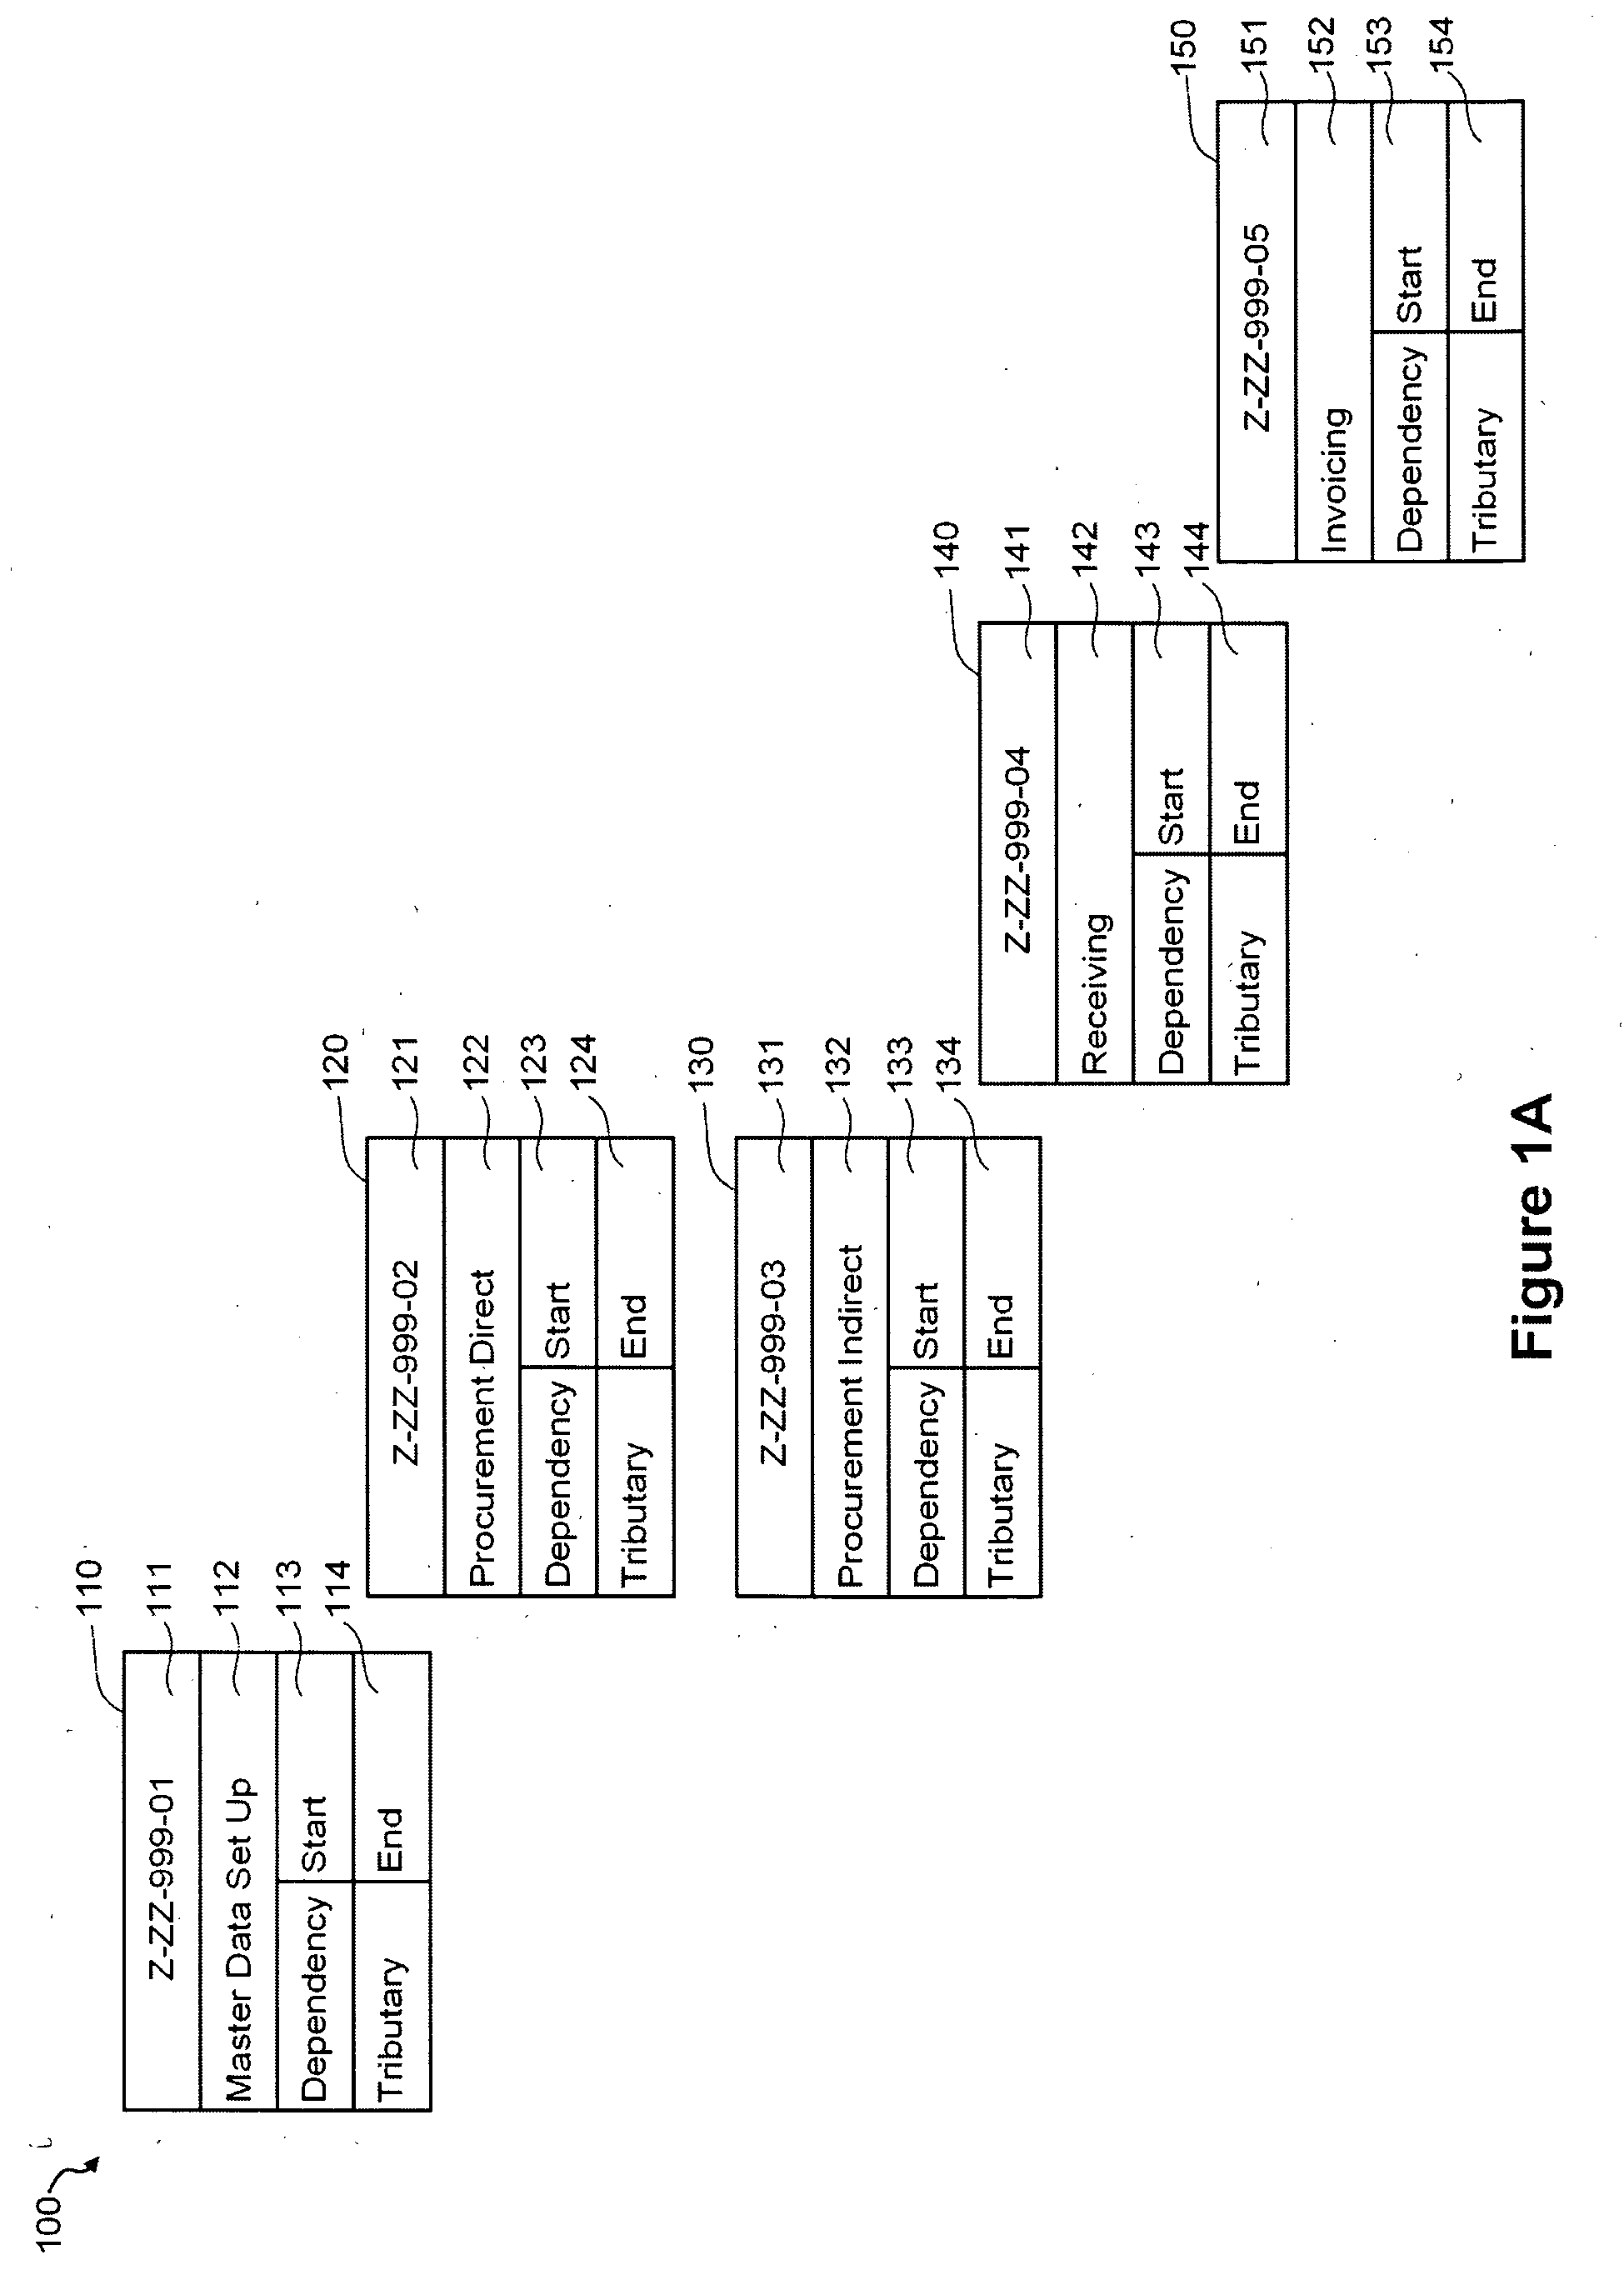 Testing tool comprising an automated multidimensional traceability matrix for implementing and validating complex software systems